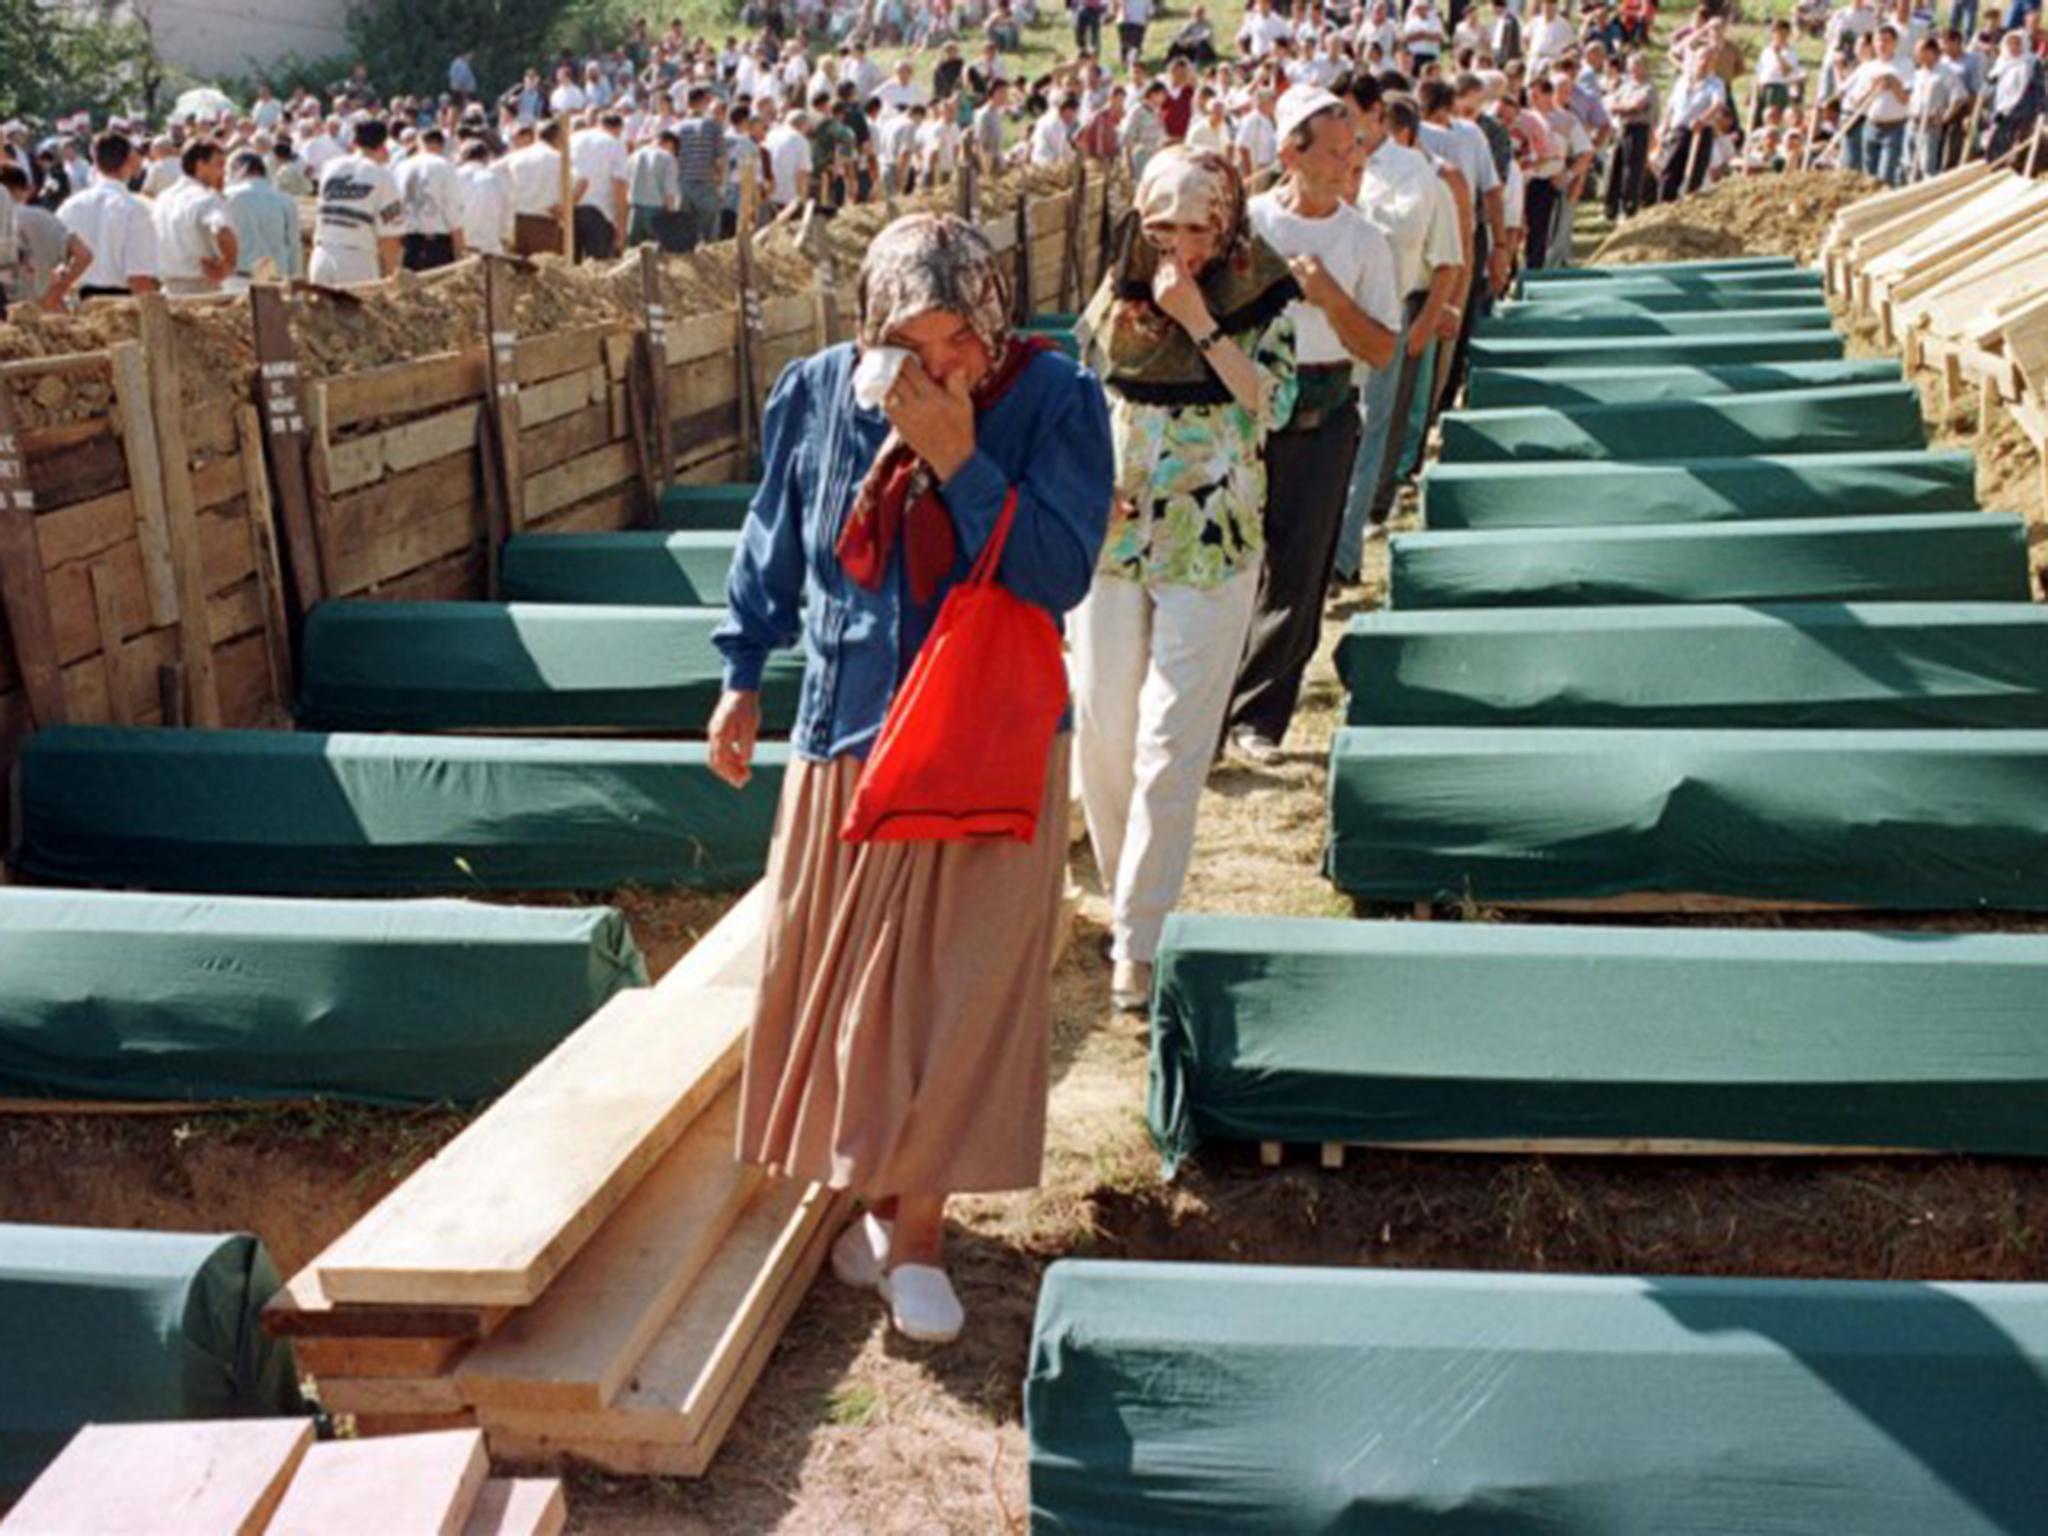 Mourners in Mostar visit the makeshift burial sites made by the people who lost their lives in the Bosnian war